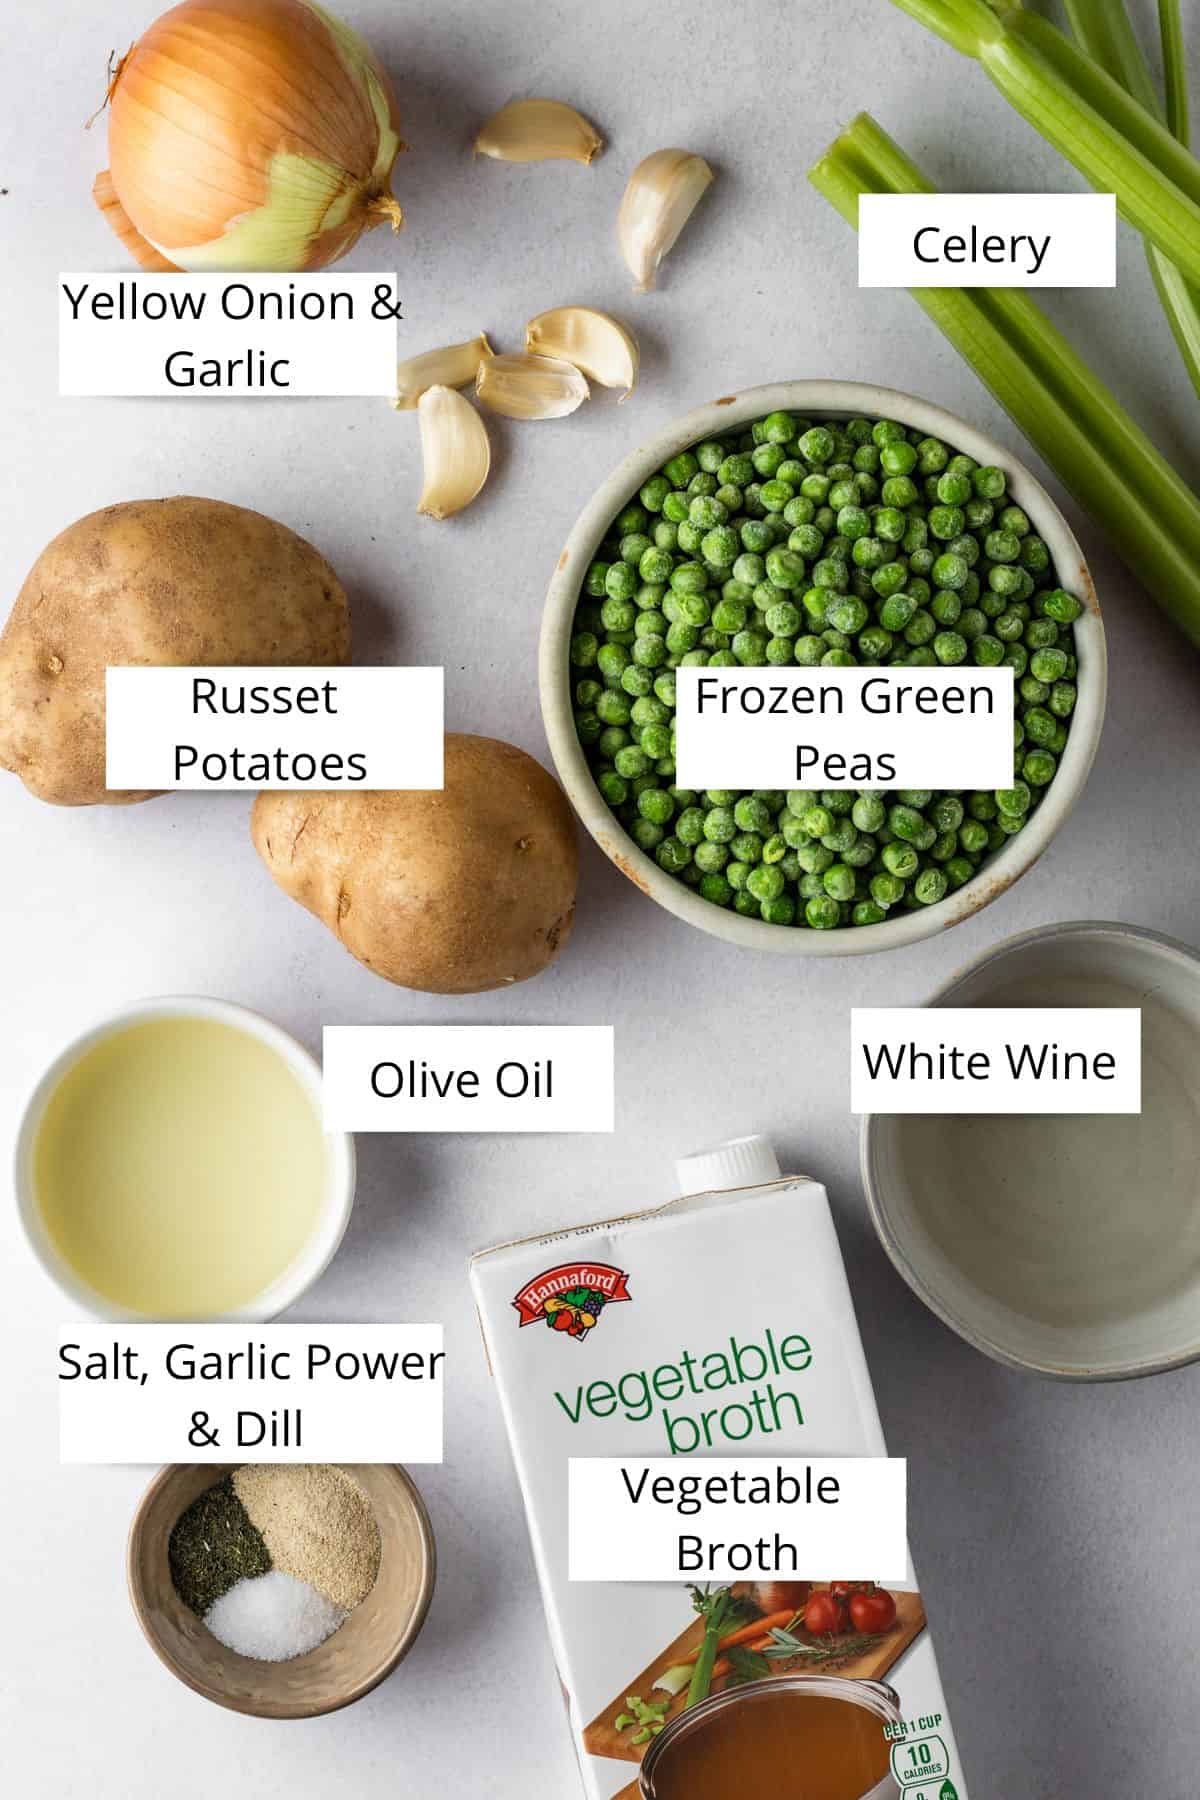 Yellow onion, garlic cloves, russet potatoes, celery, frozen green peas in a bowl, olive oil in a bowl, white wine in a bowl, spices in a pinch bowl and a box of vegetable broth.